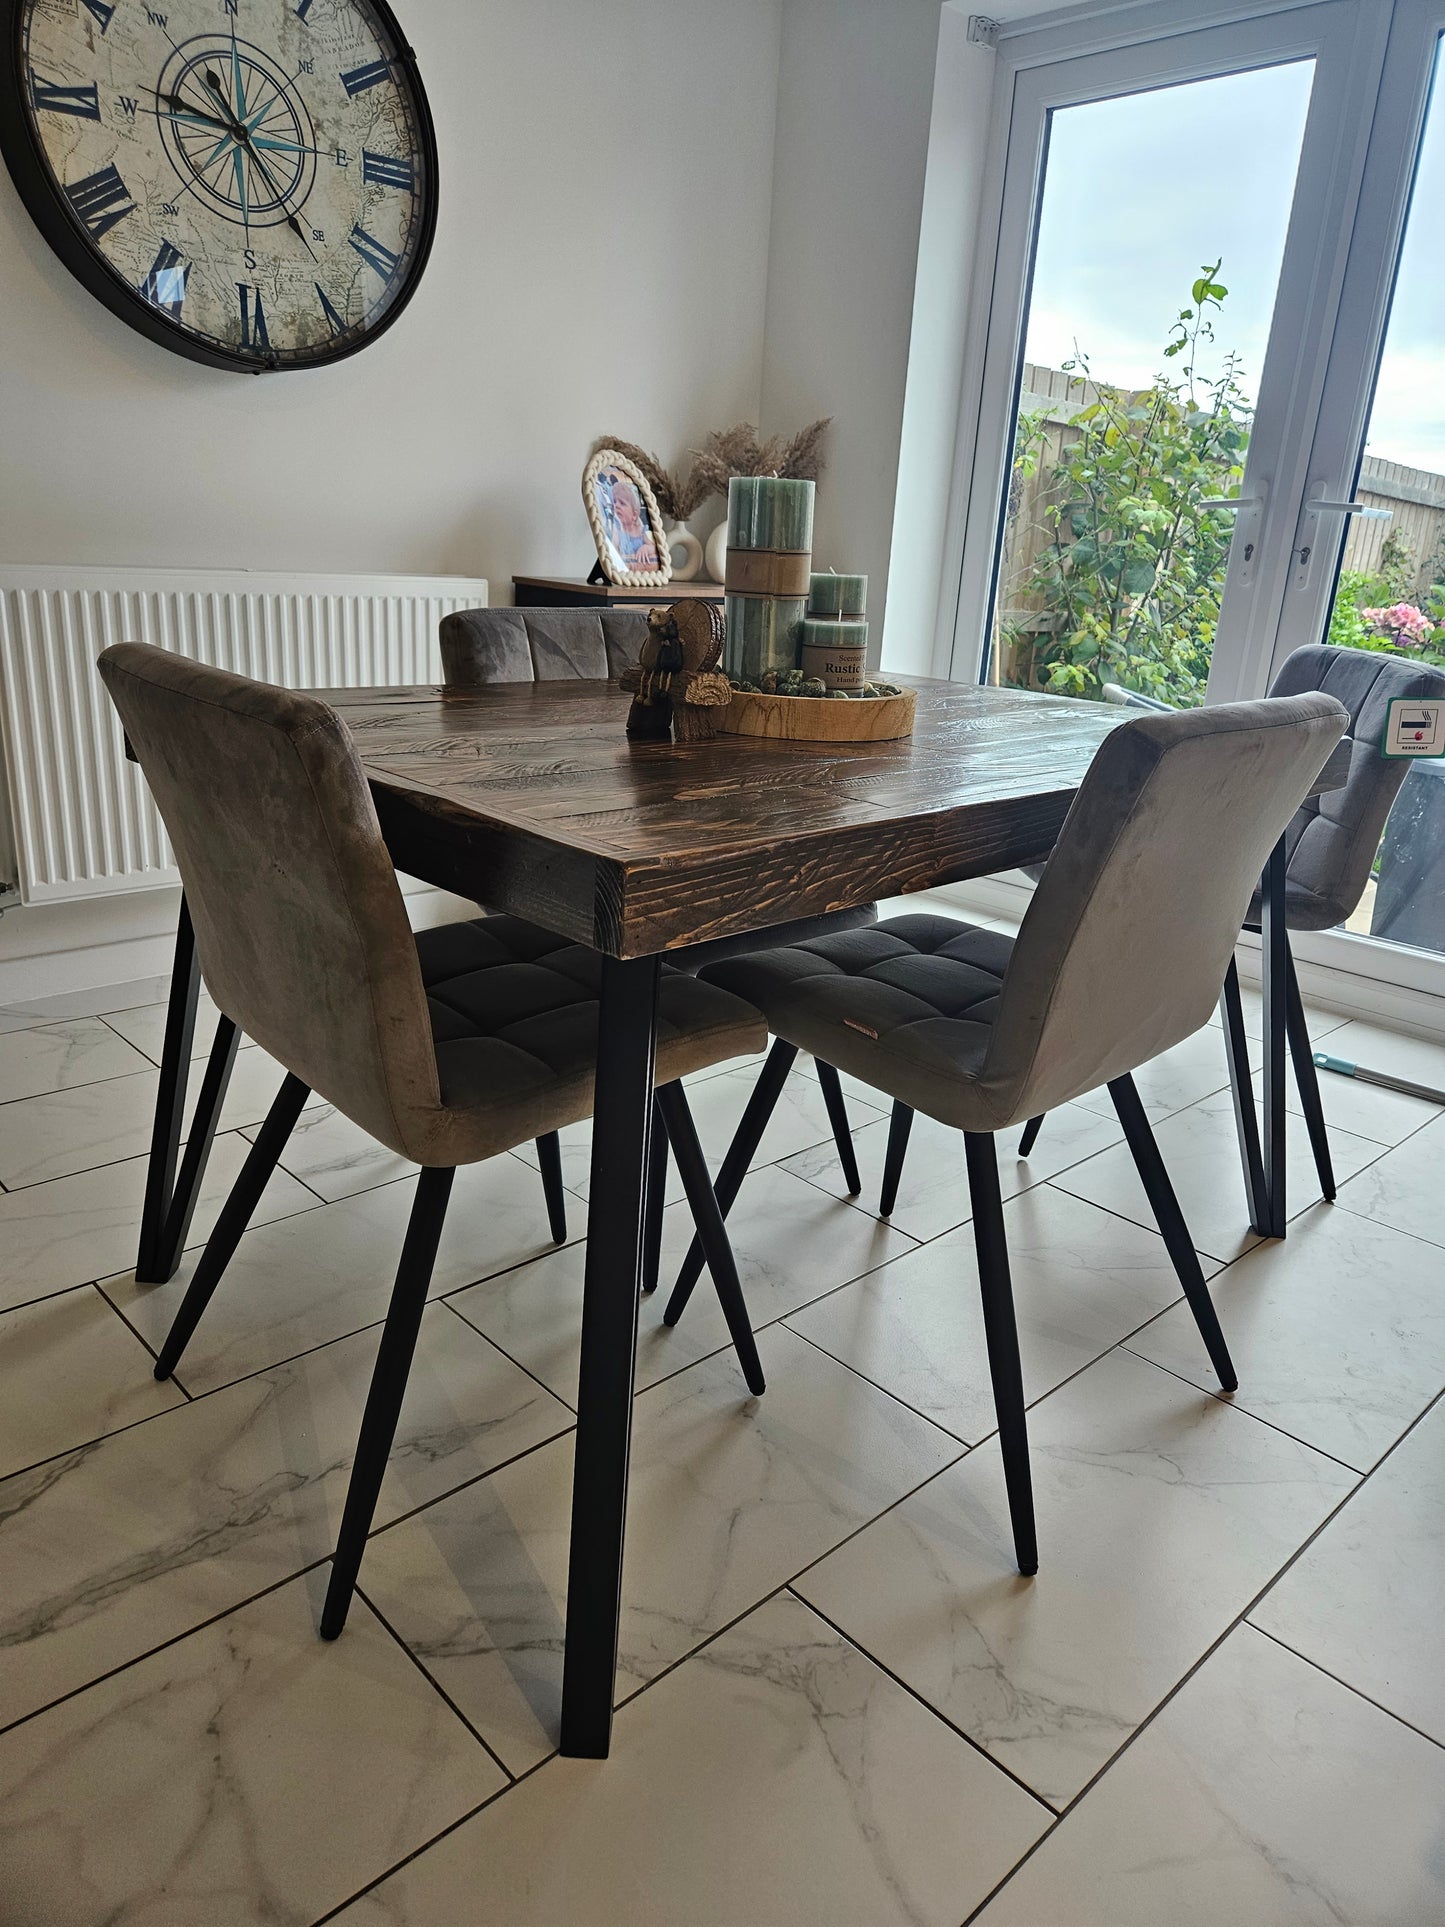 Hairpin style Dining Table with 4 chairs (grey)